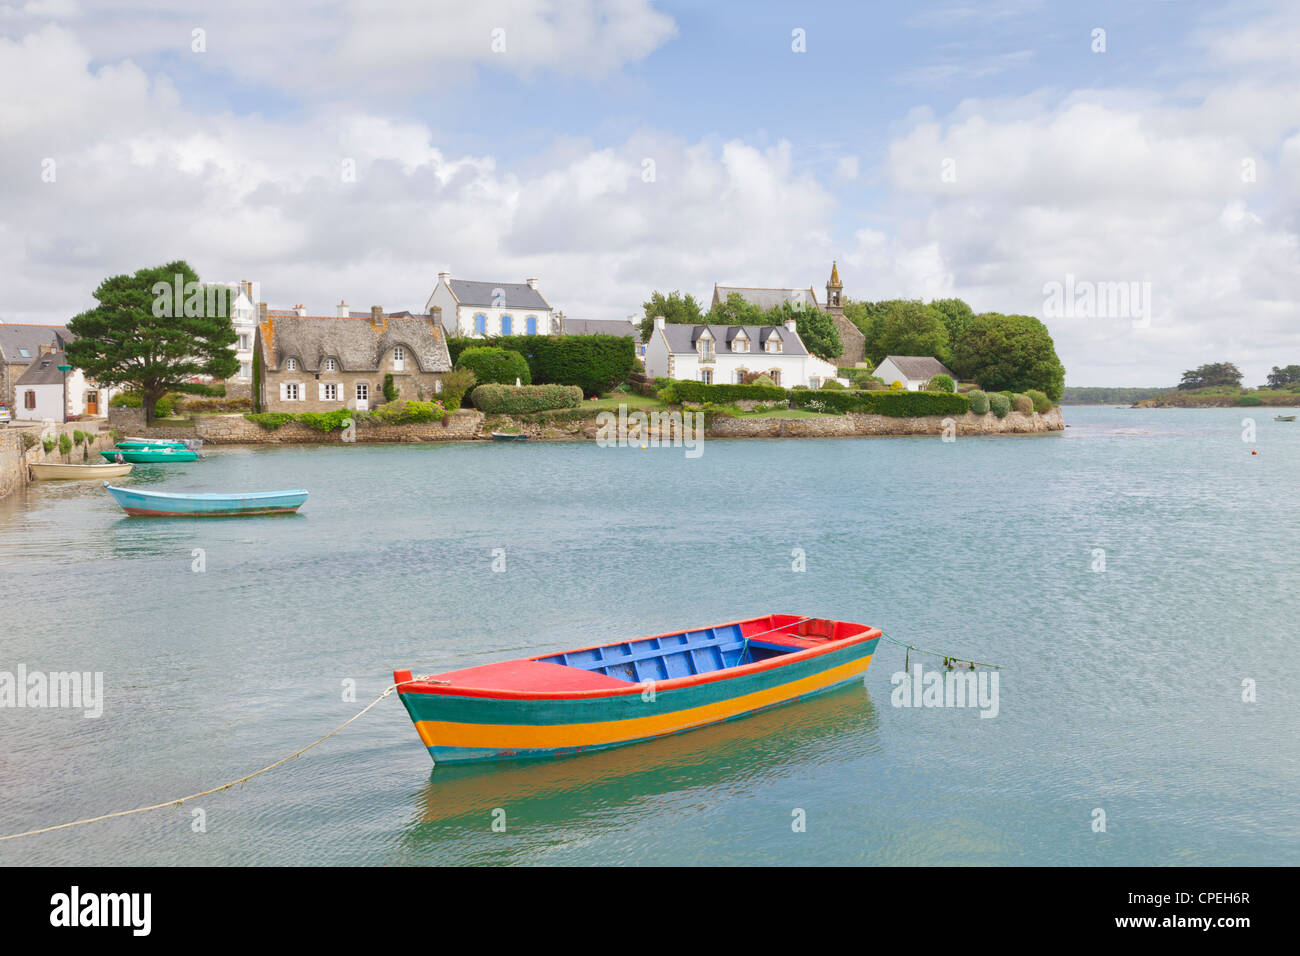 Island of Saint Cado on the River Etel, Brittany,France, on a lovely summer day. Stock Photo